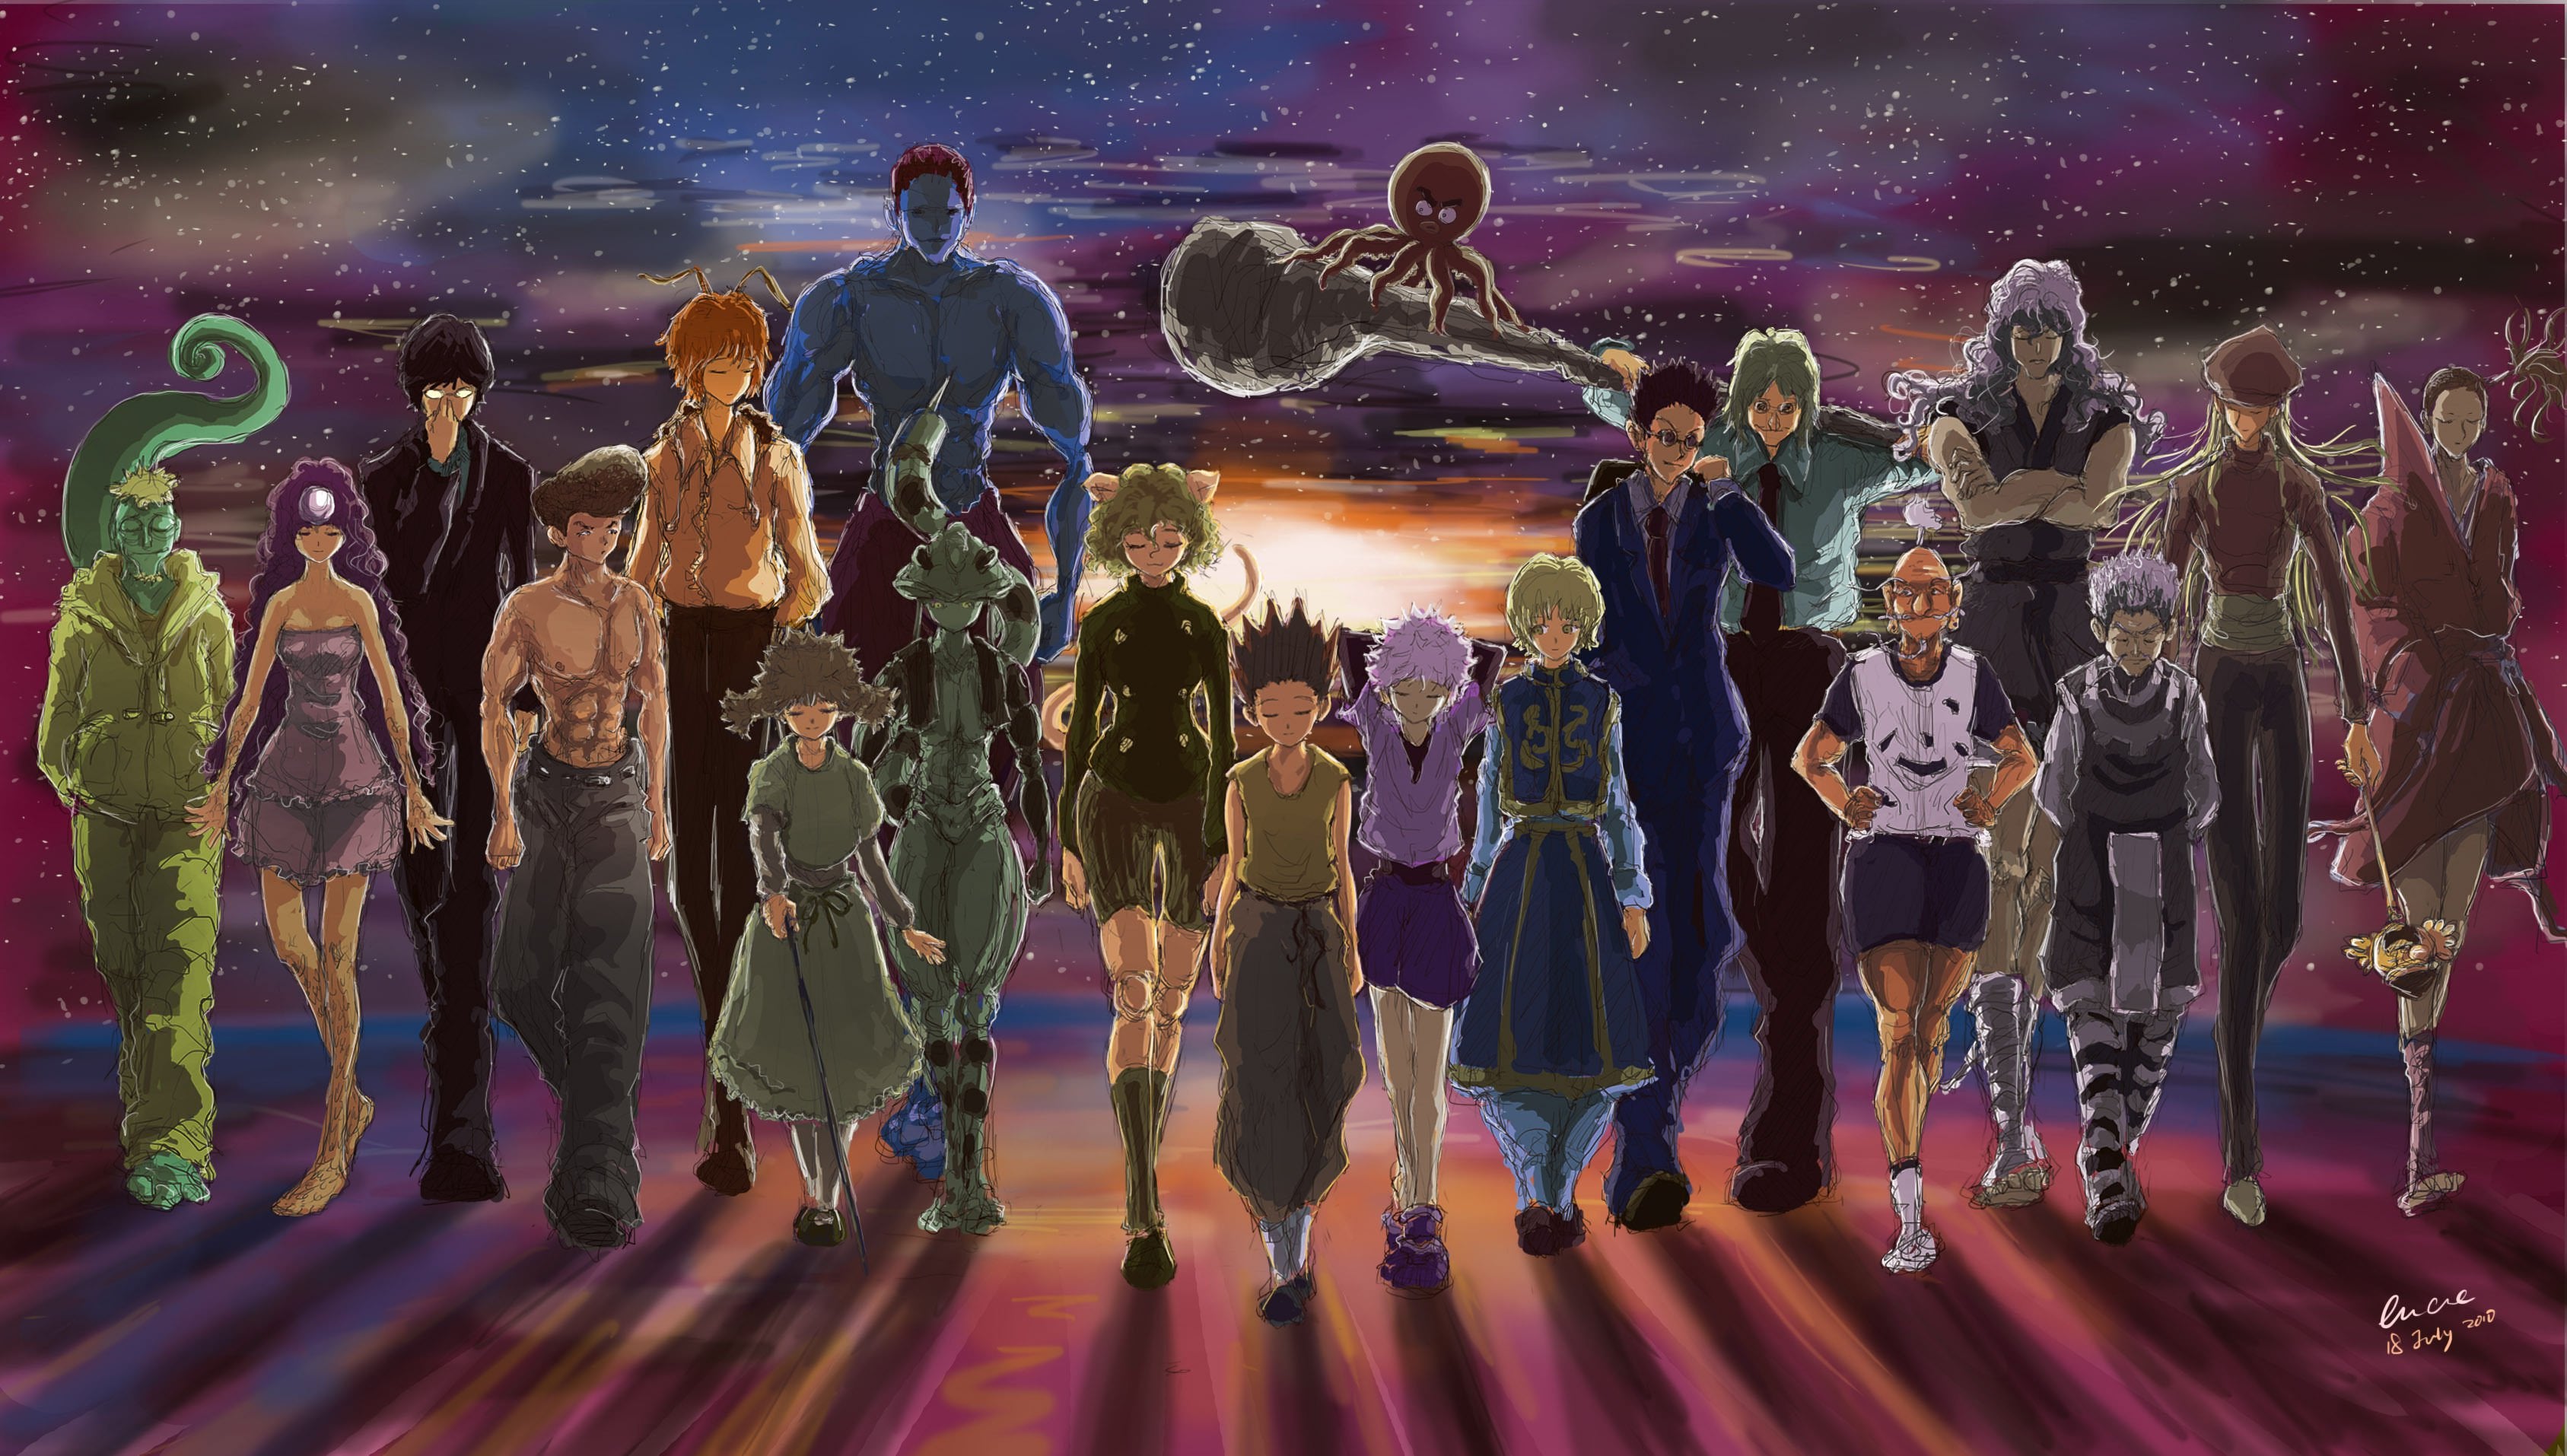 A cool wallpaper with some HxH characters